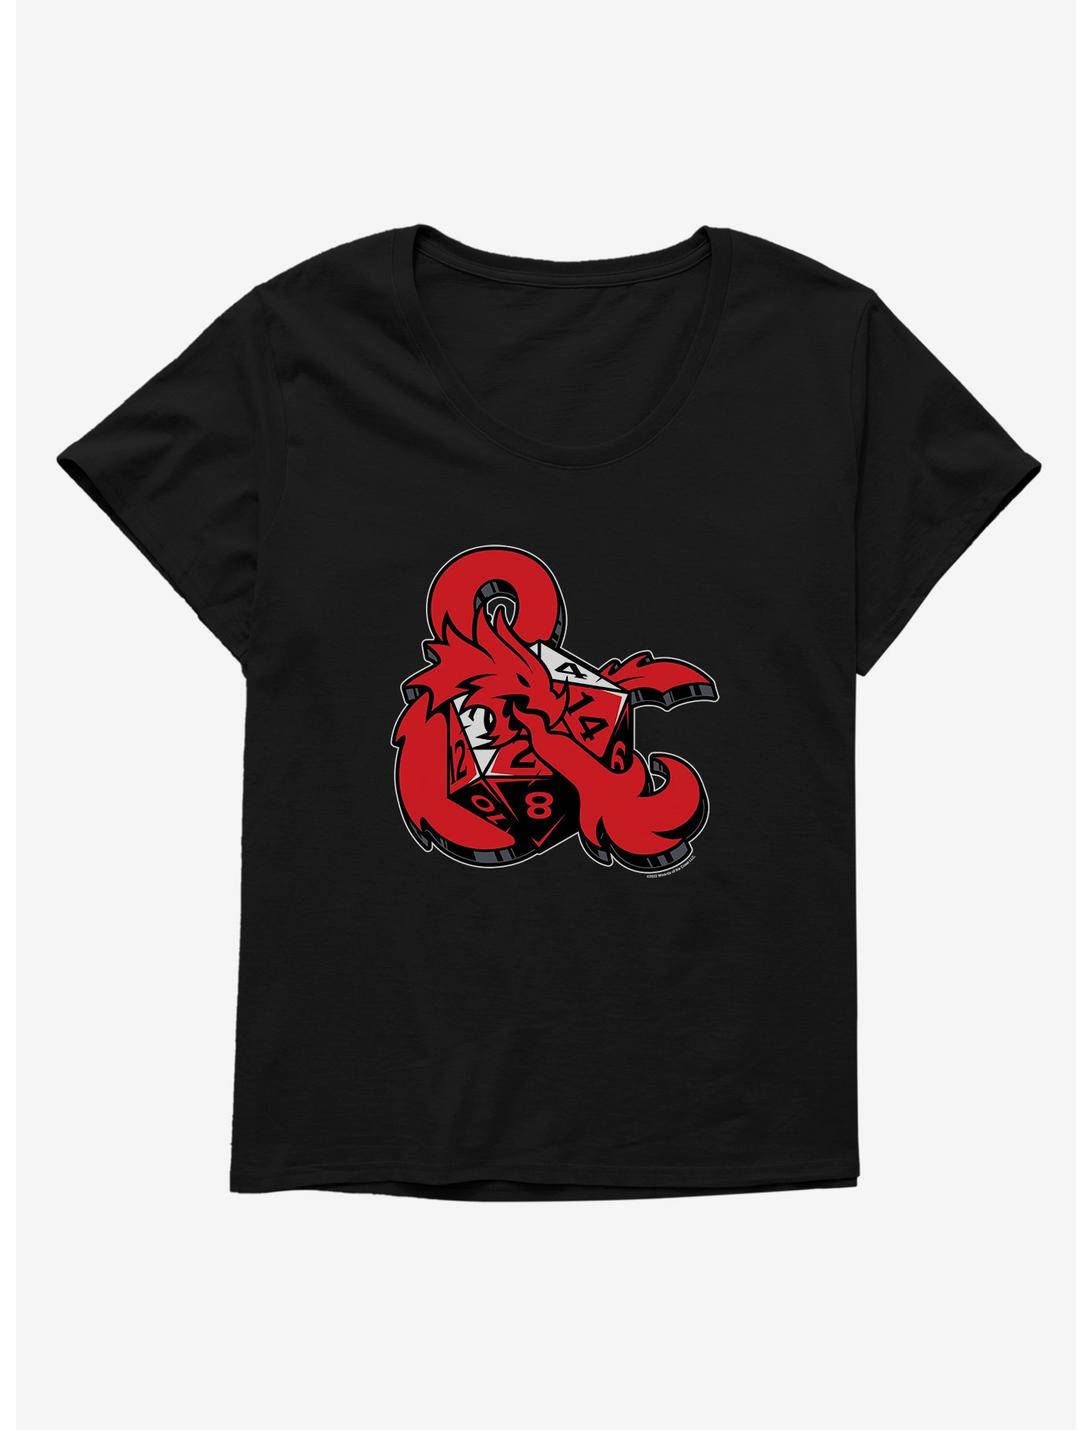 Dungeons & Dragons Ampersand Dice Womens T-Shirt Plus Size, BLACK, hi-res